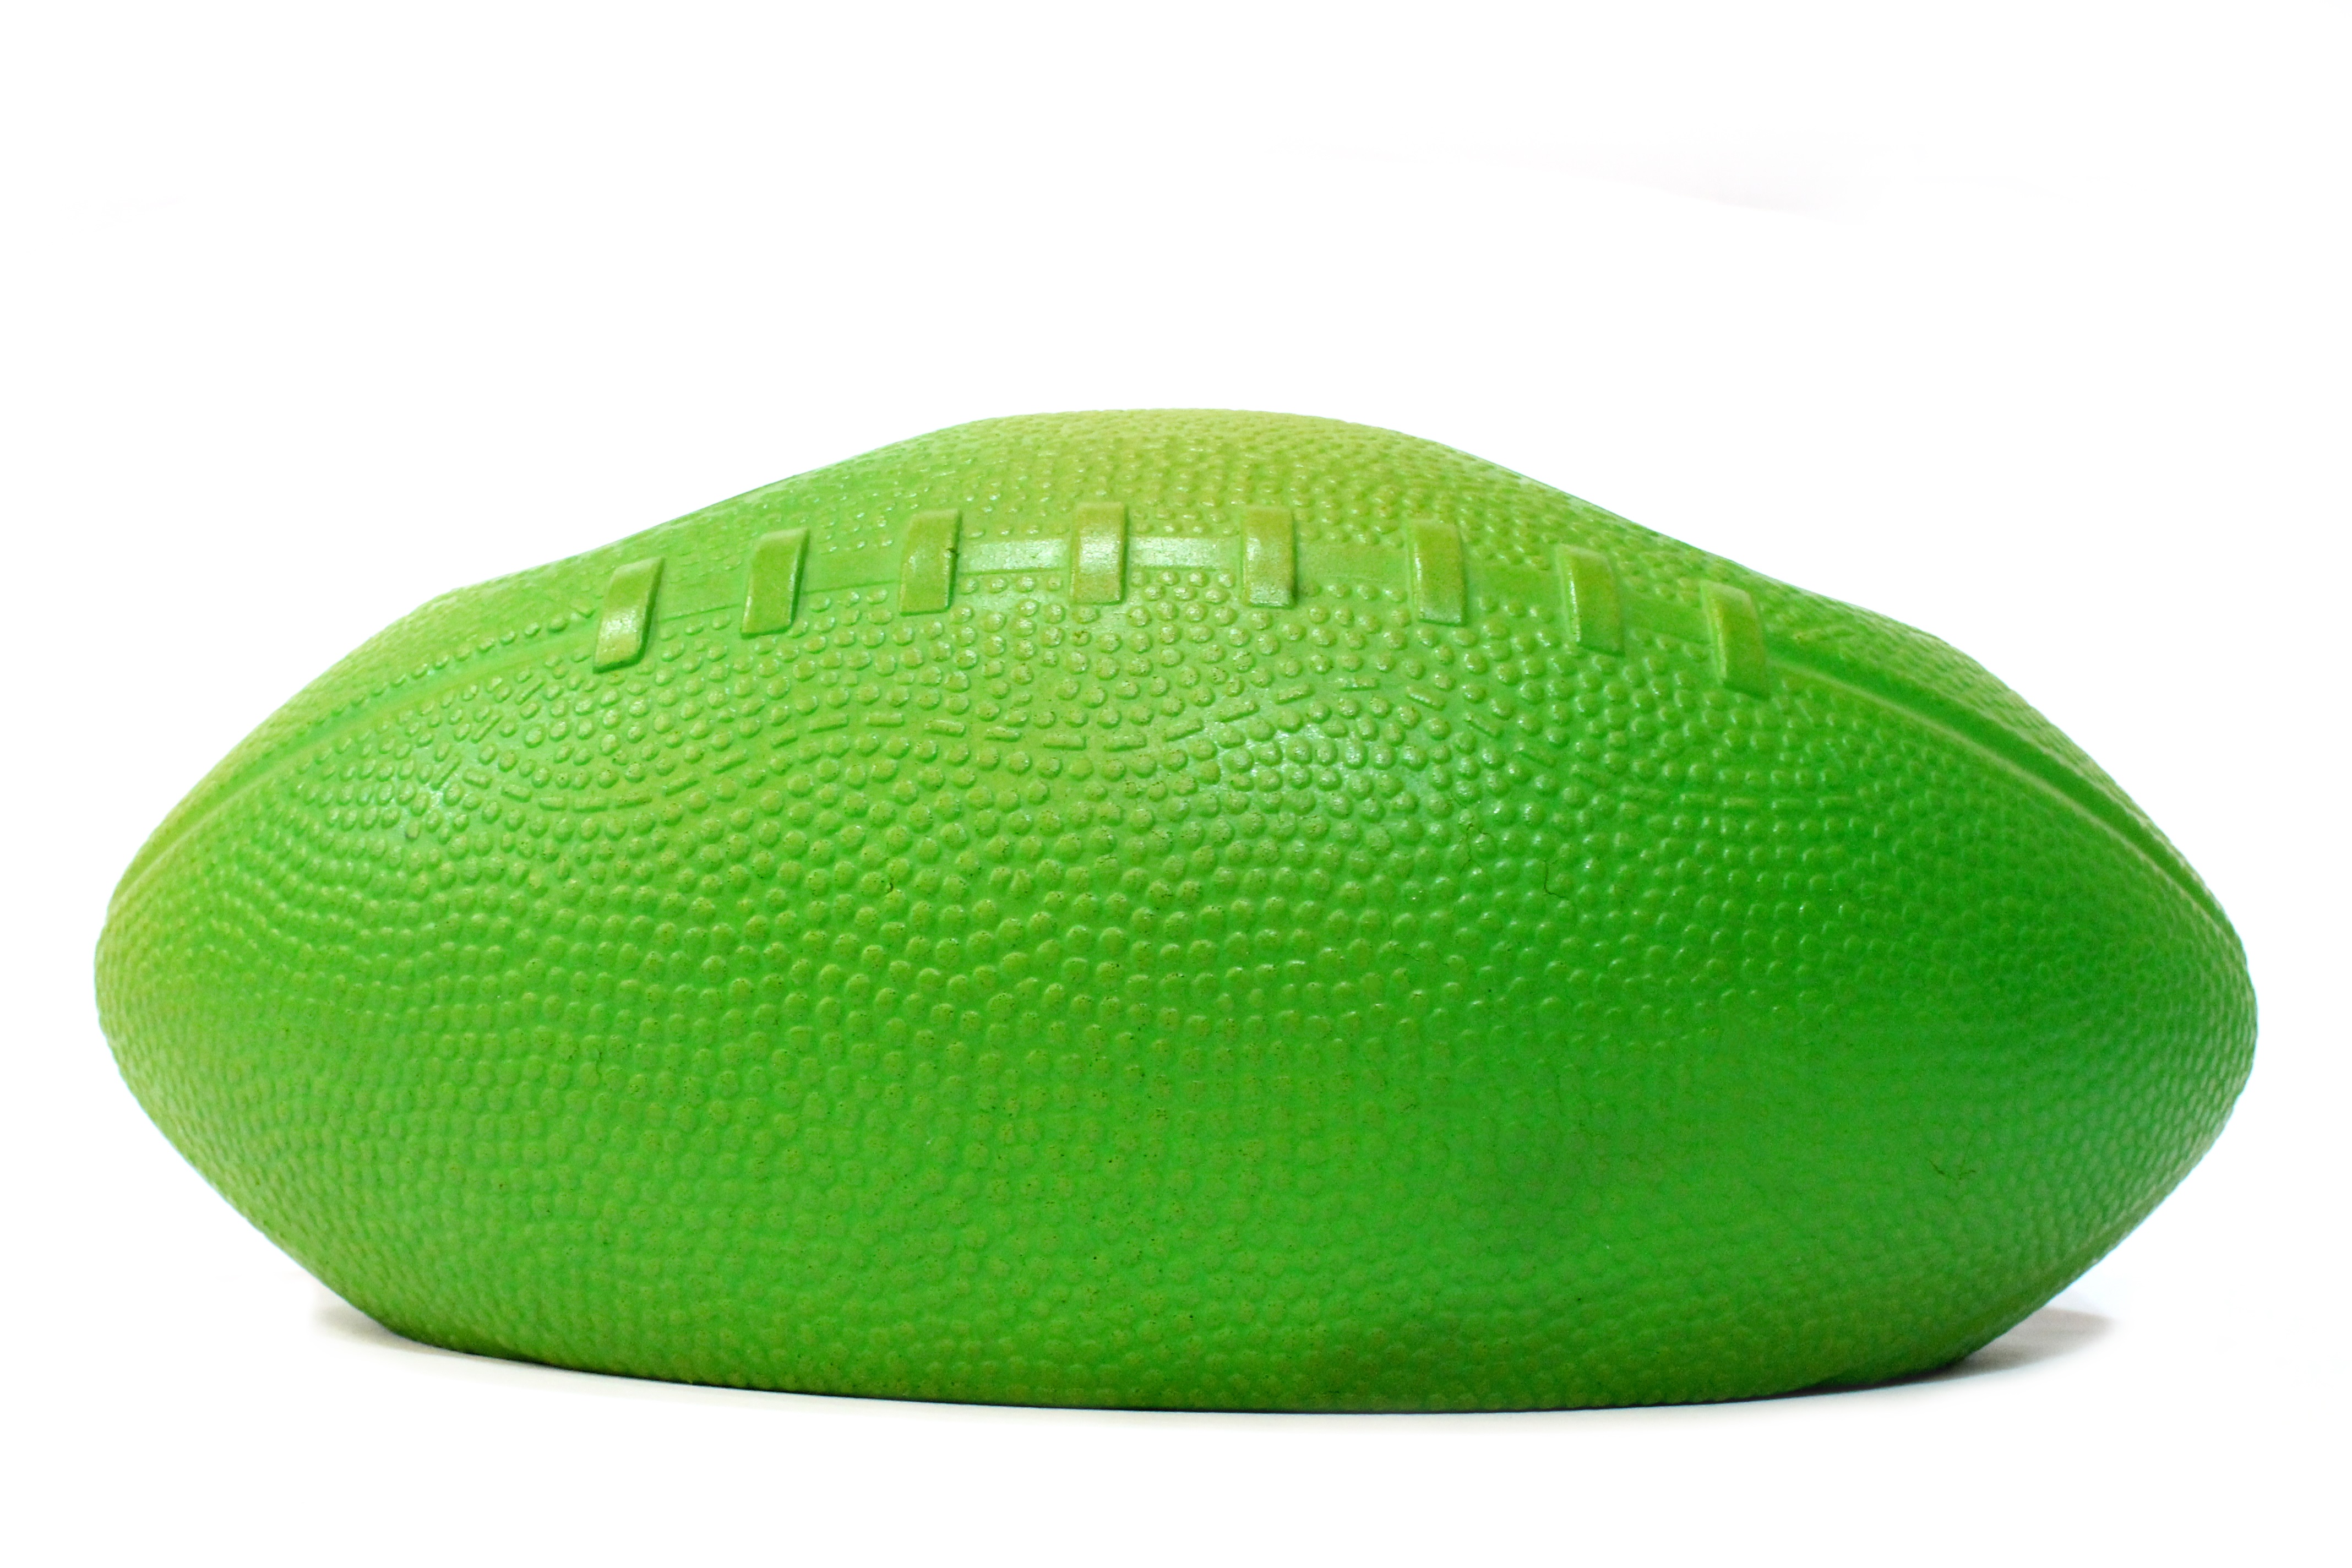 OEM custom rugby,rugby stress ball,gray rugby ball